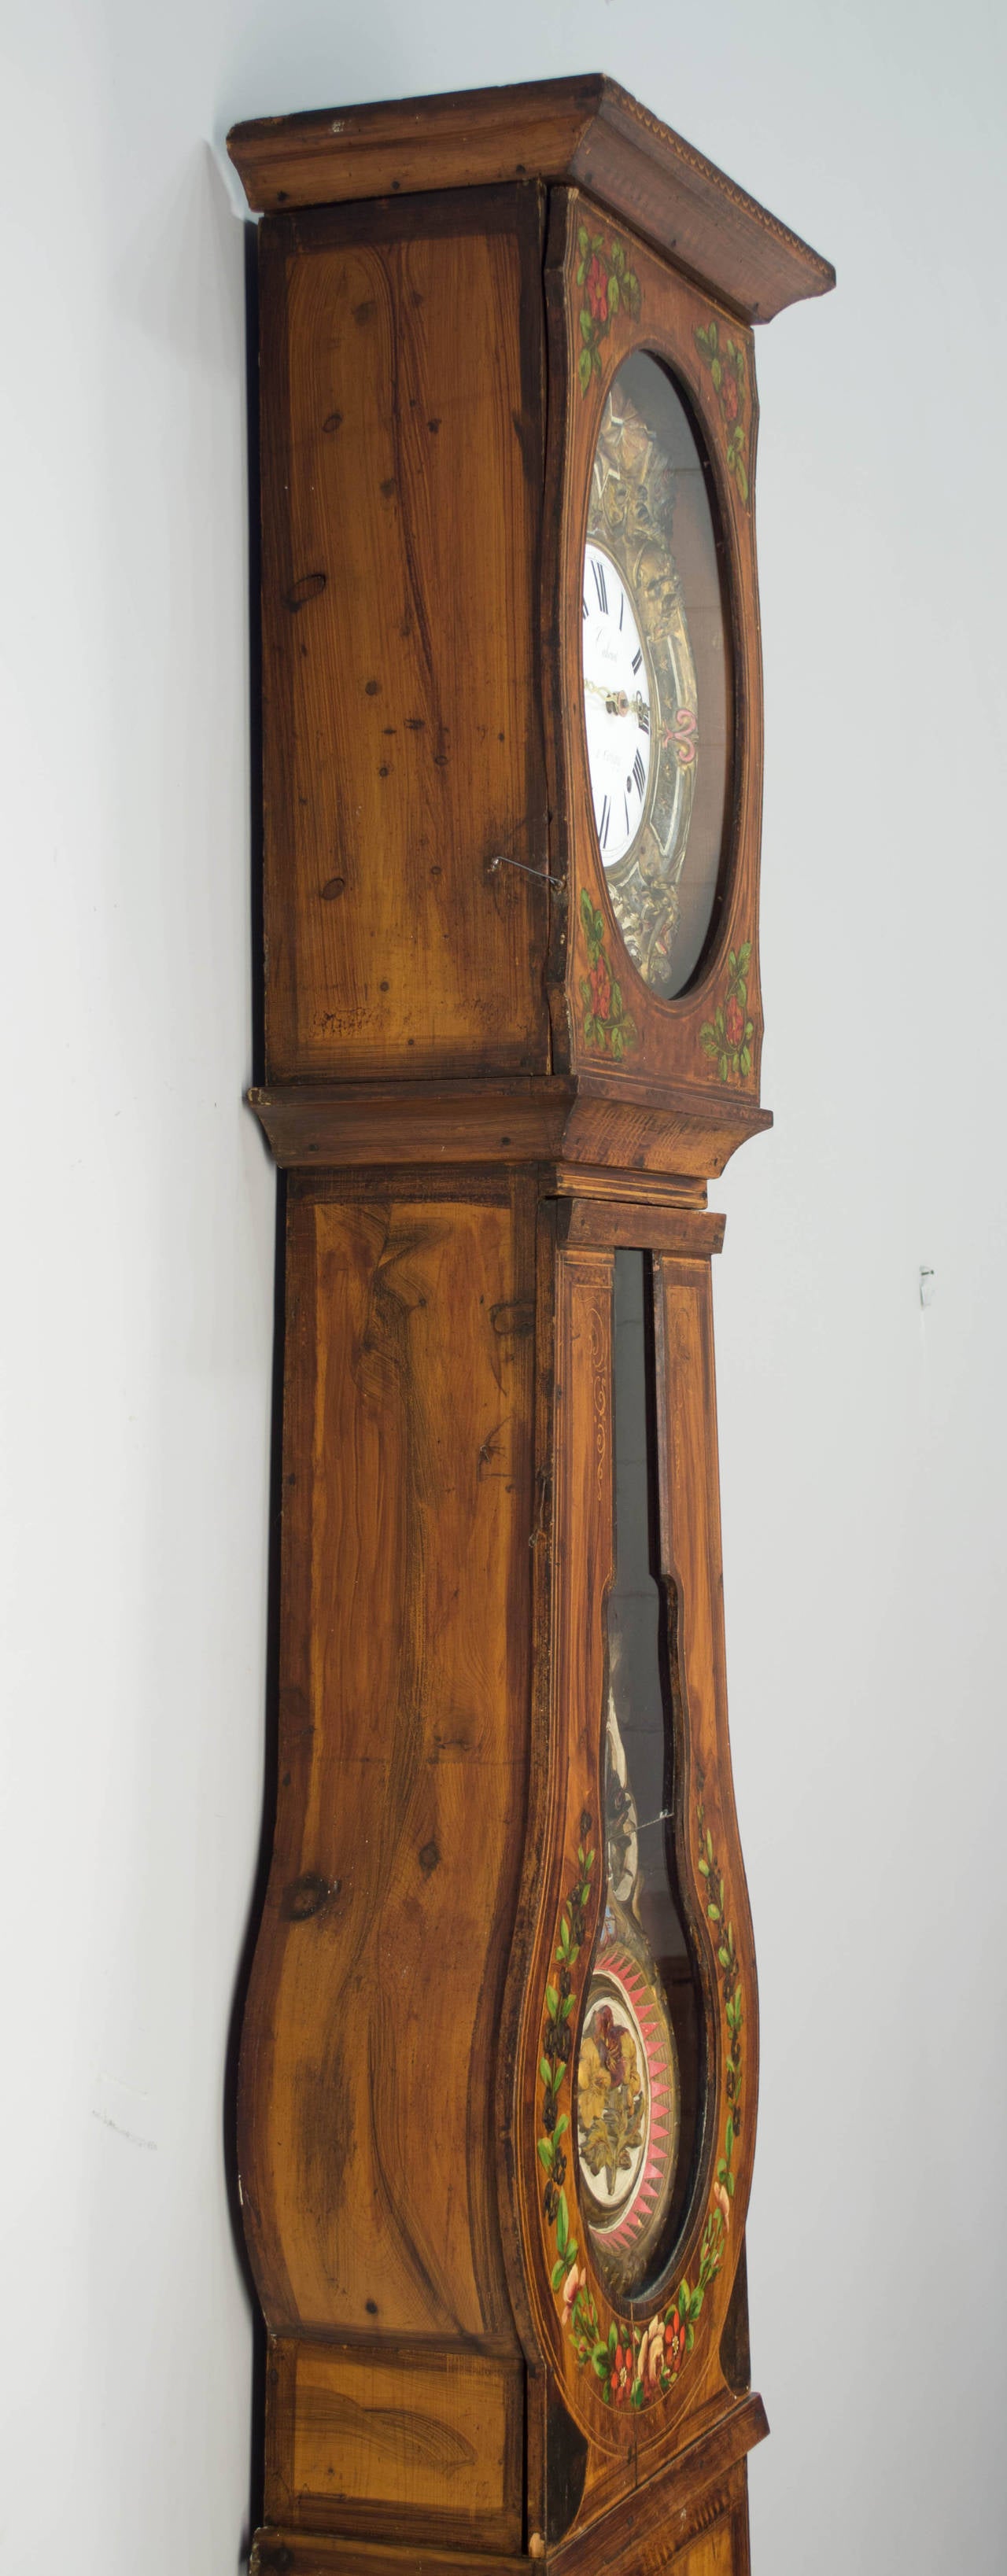 A comtoise or grandfather clock with polychrome painted pine case and brass embossment. Seven day clock, in working condition and professionally cleaned, strikes on the hour, two minutes after the hour and once on the half. This clock was sold by